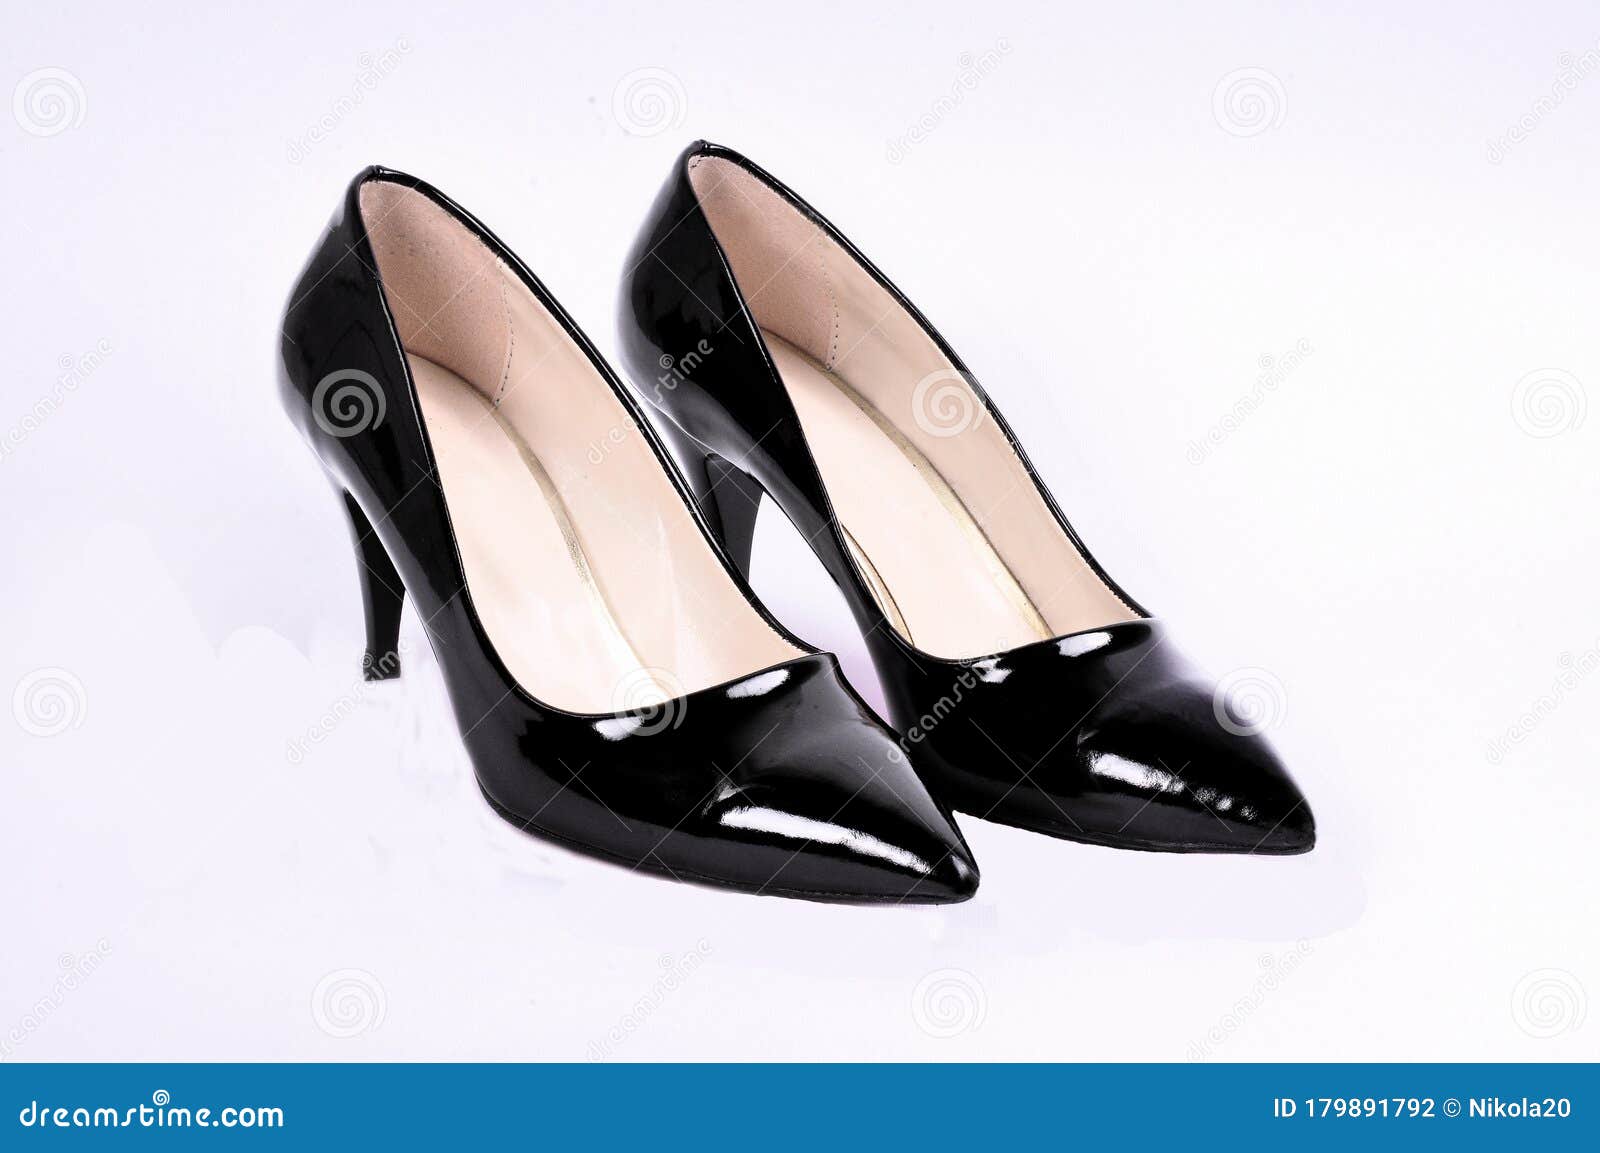 Beautiful Elegant Shoes for Women Black Patent Leather High Heels on a ...